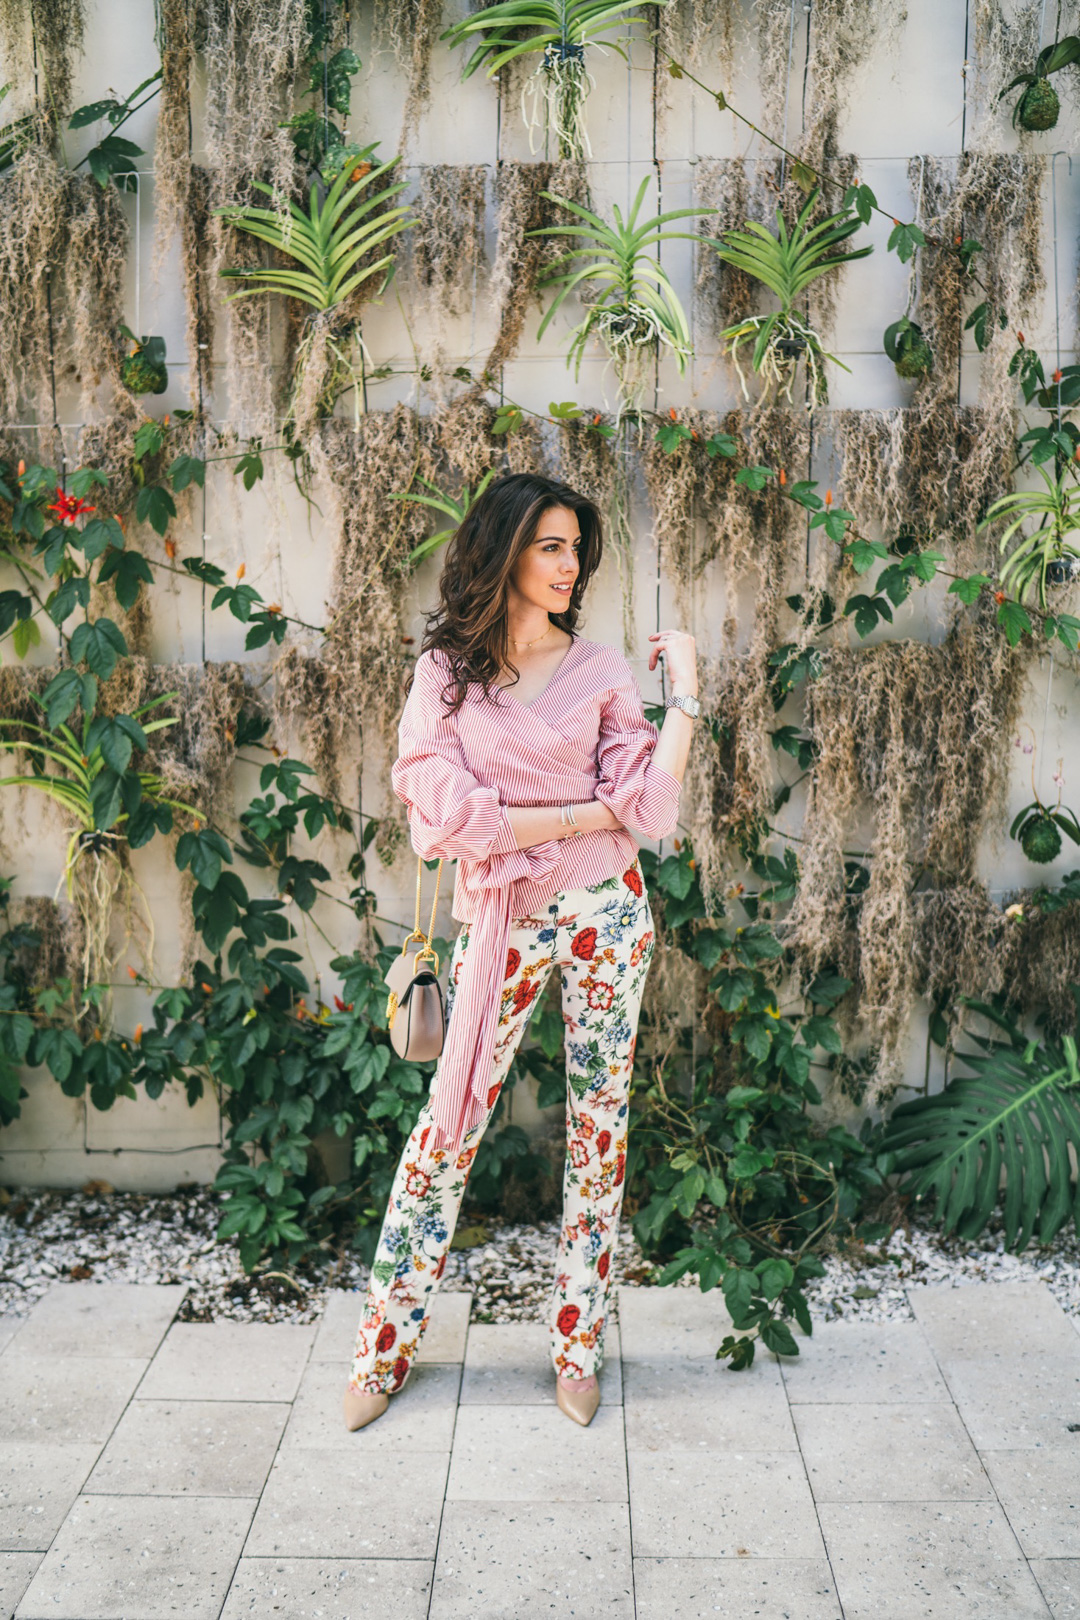 Jackie styling mixed prints in Miami.